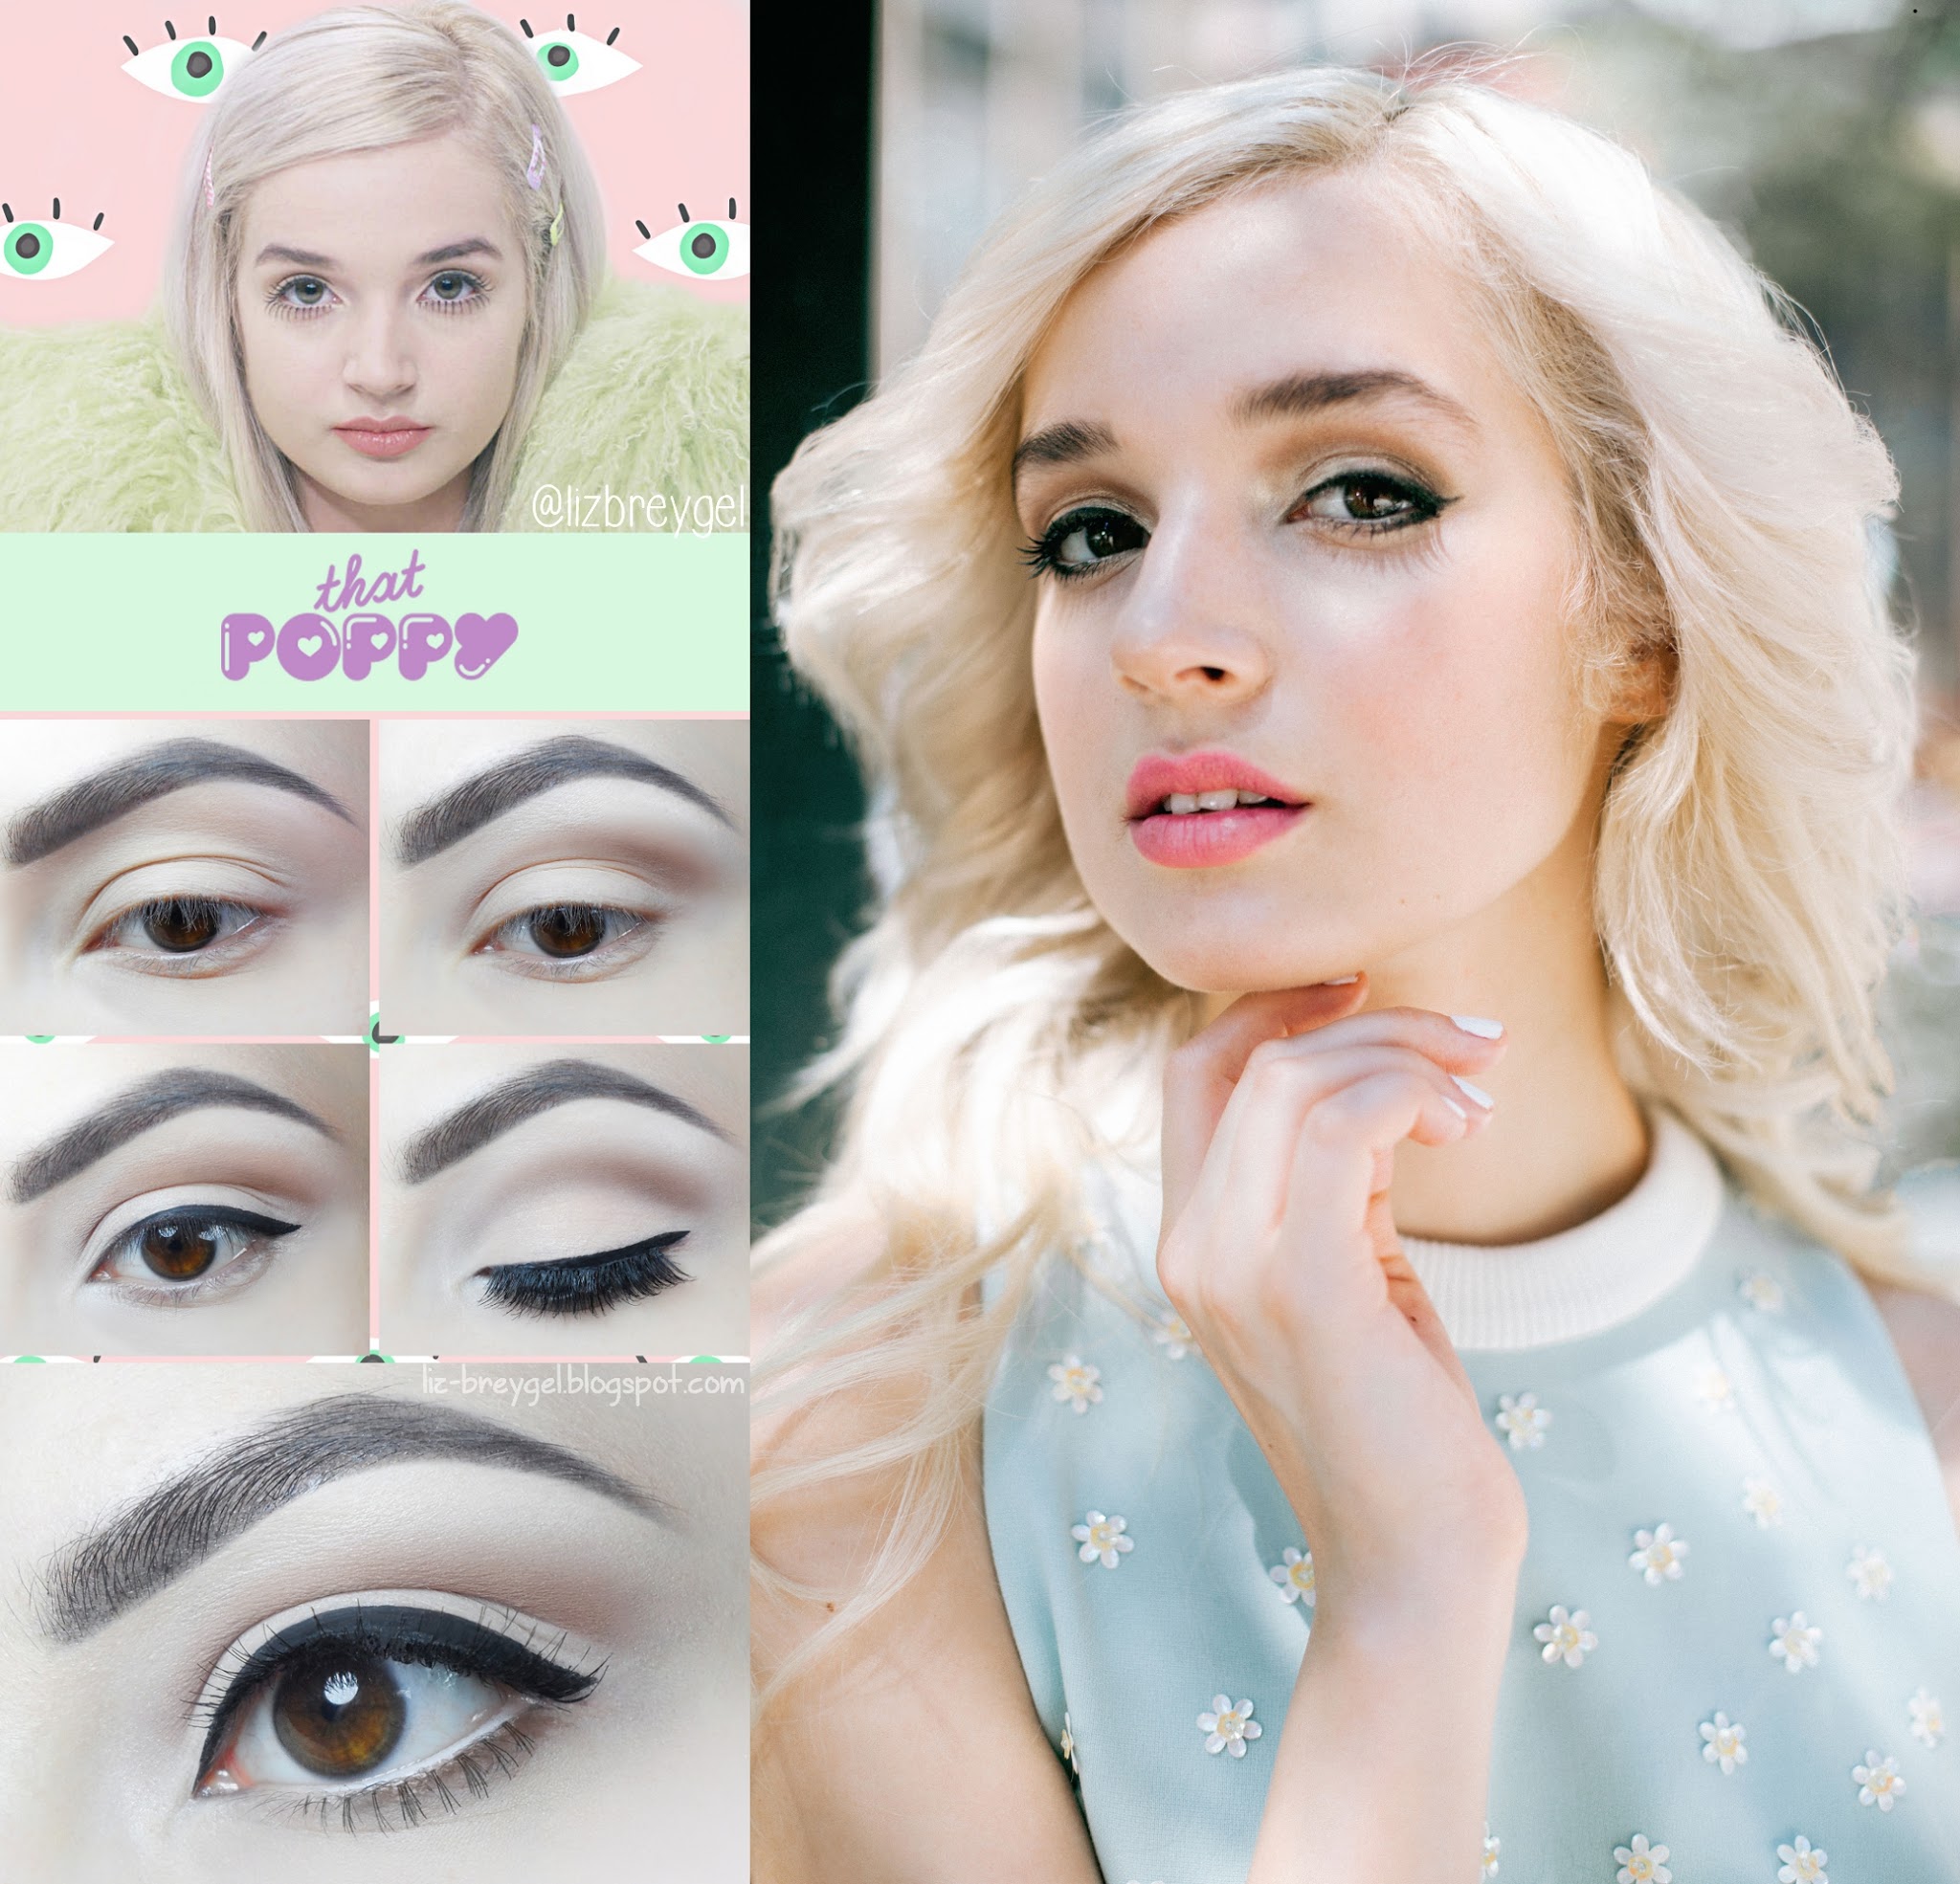 makeup collage and pcitorial that shows how to do that poppy makeup look